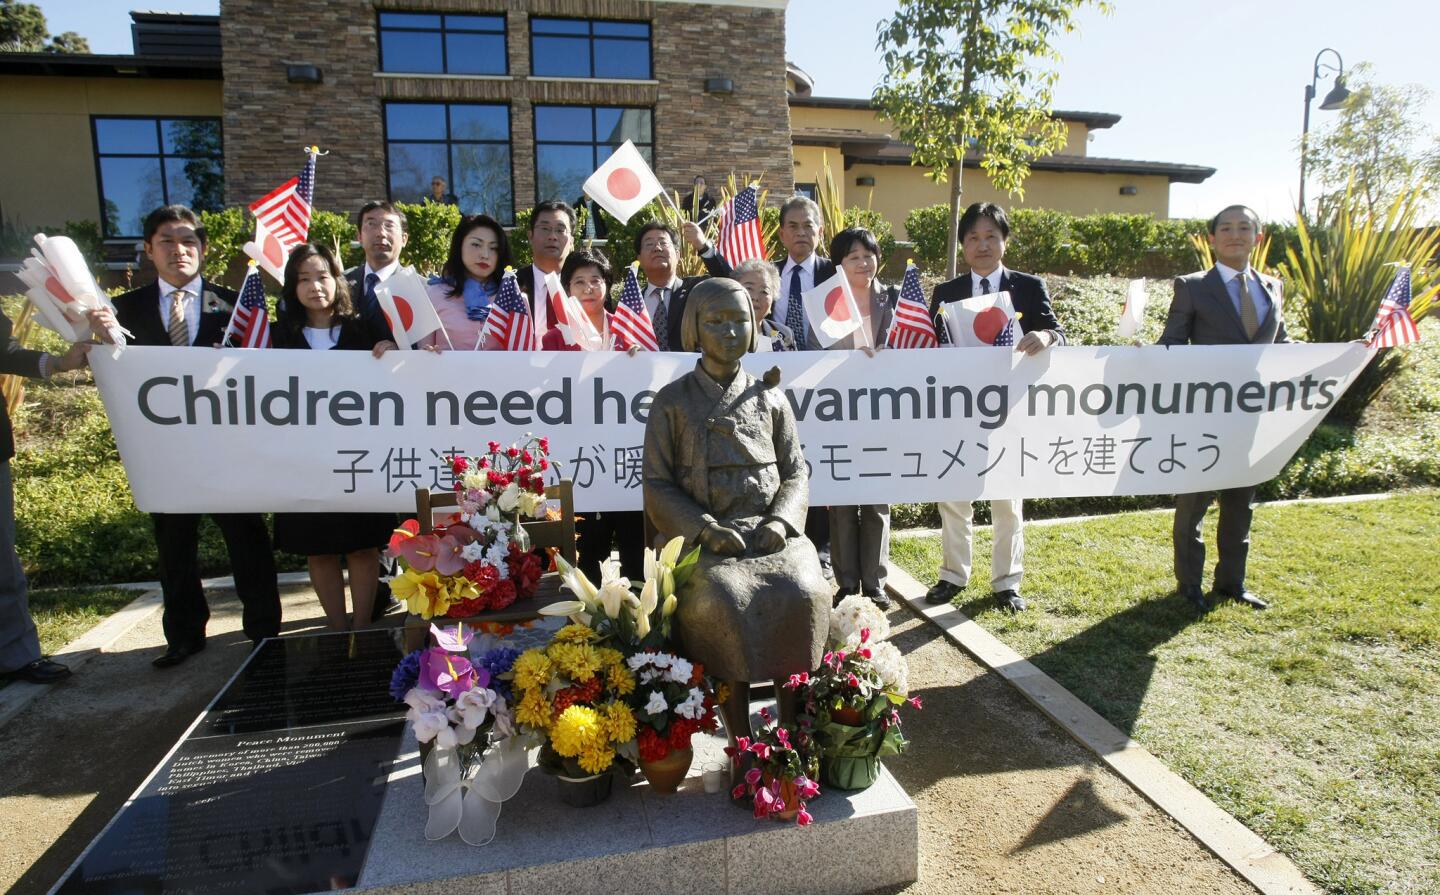 Japanese delegation requests removal, visits controversial Comfort Women statue